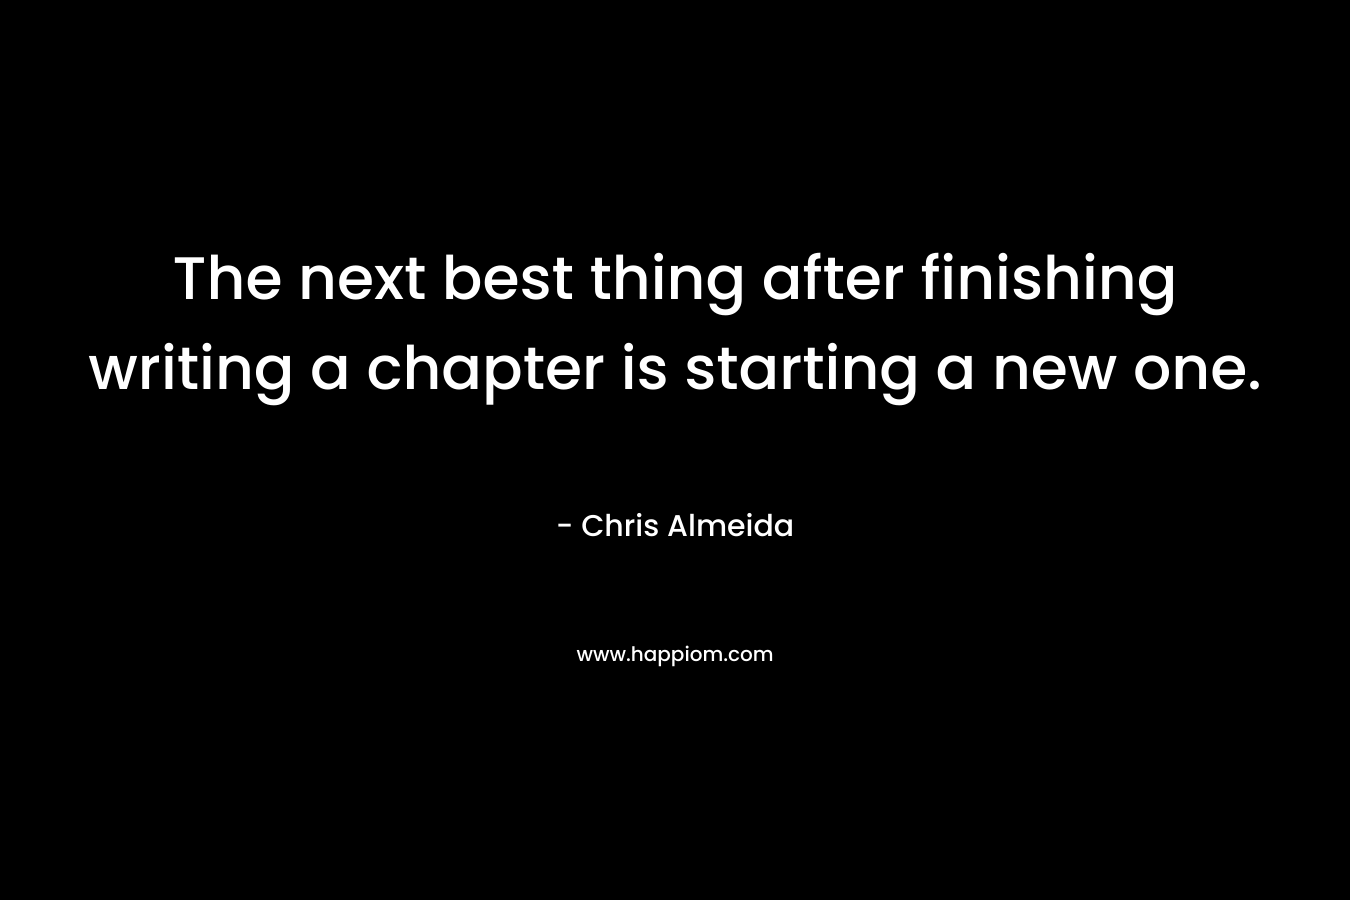 The next best thing after finishing writing a chapter is starting a new one. – Chris Almeida